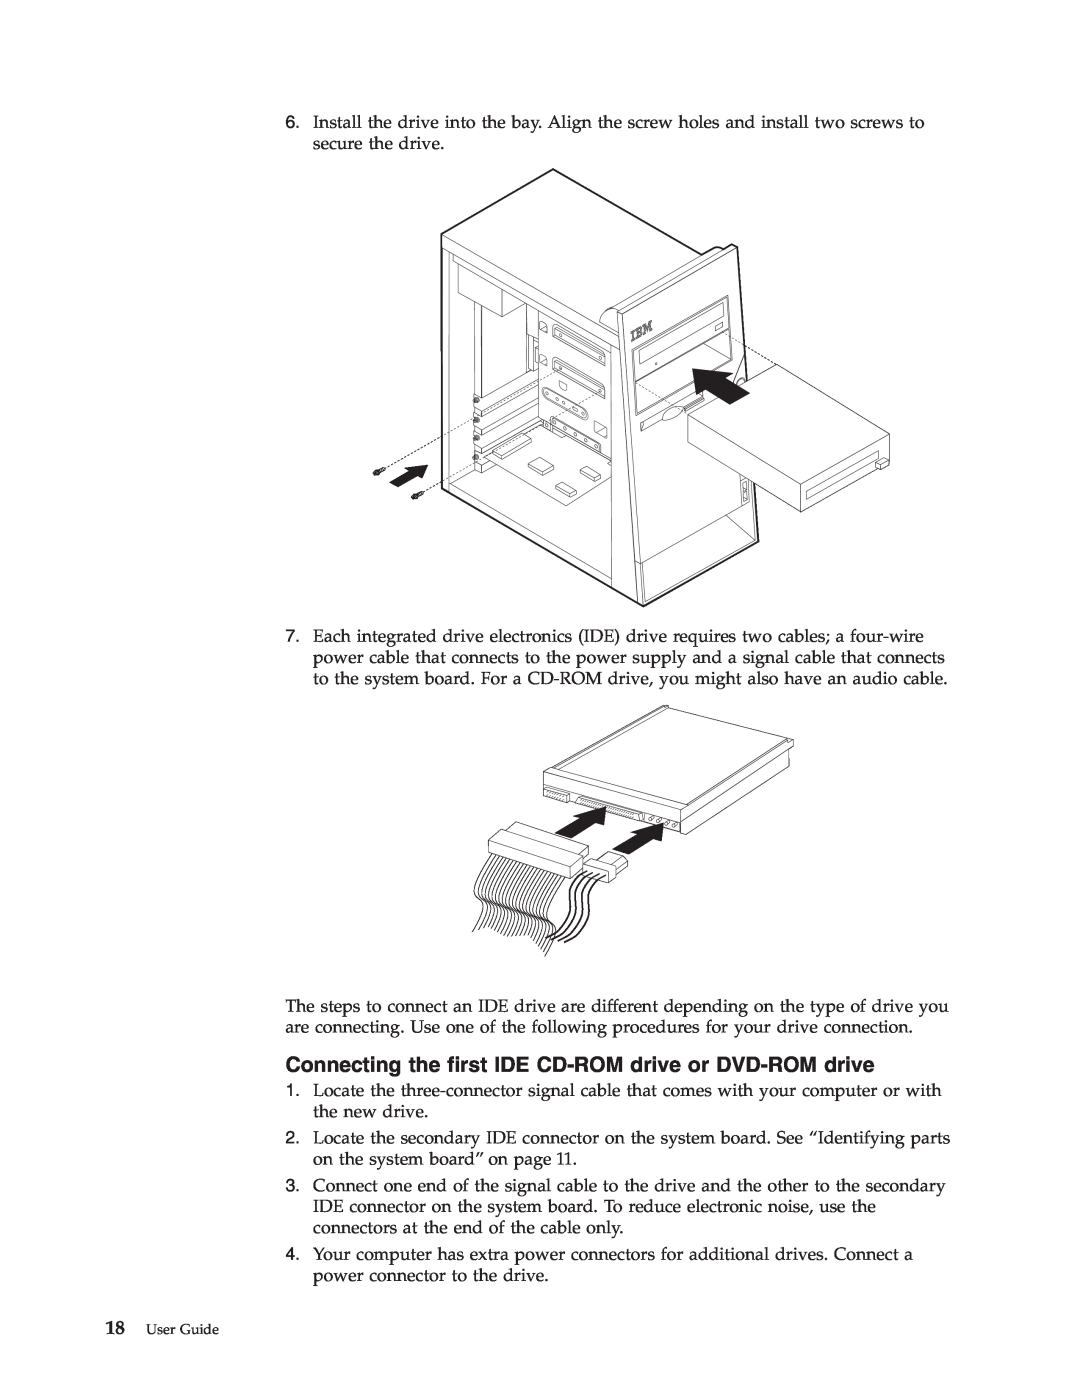 IBM 6824, 2289 manual Connecting the first IDE CD-ROM drive or DVD-ROM drive, User Guide 